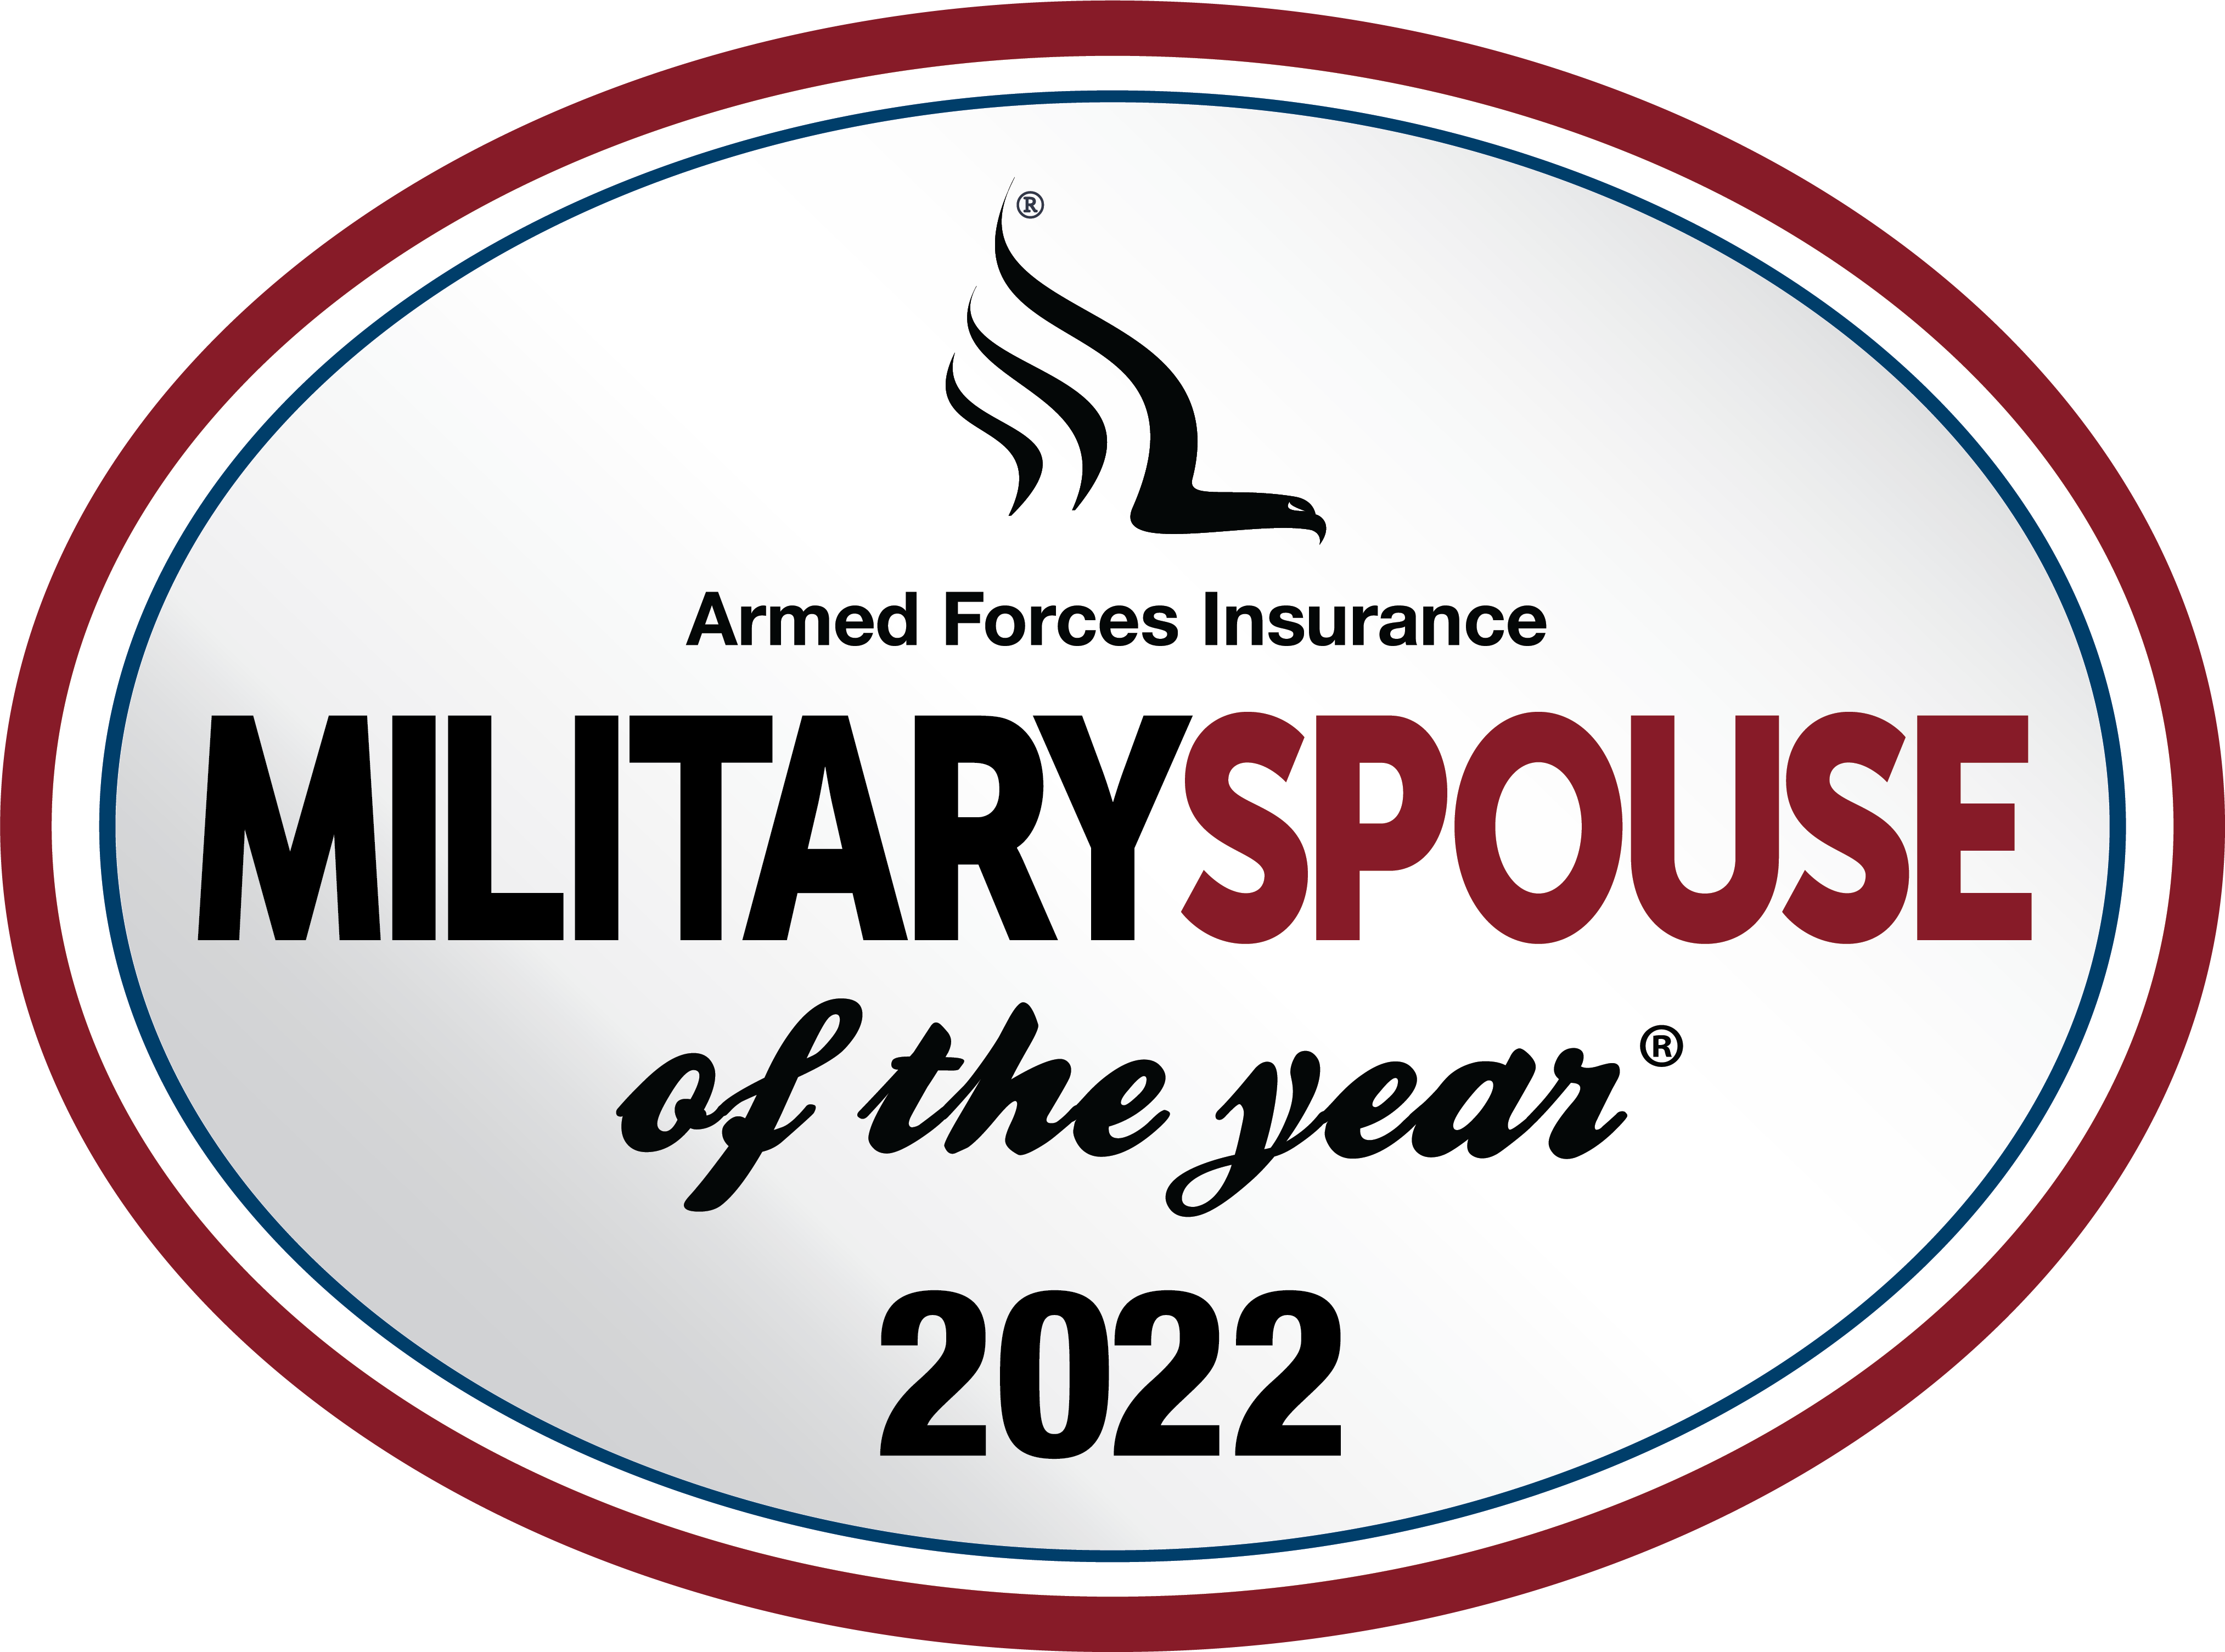 Monica Bassett is the 2022 Armed Forces Insurance Army Spouse of the Year and founder of the Stronghold Community Food Pantry.